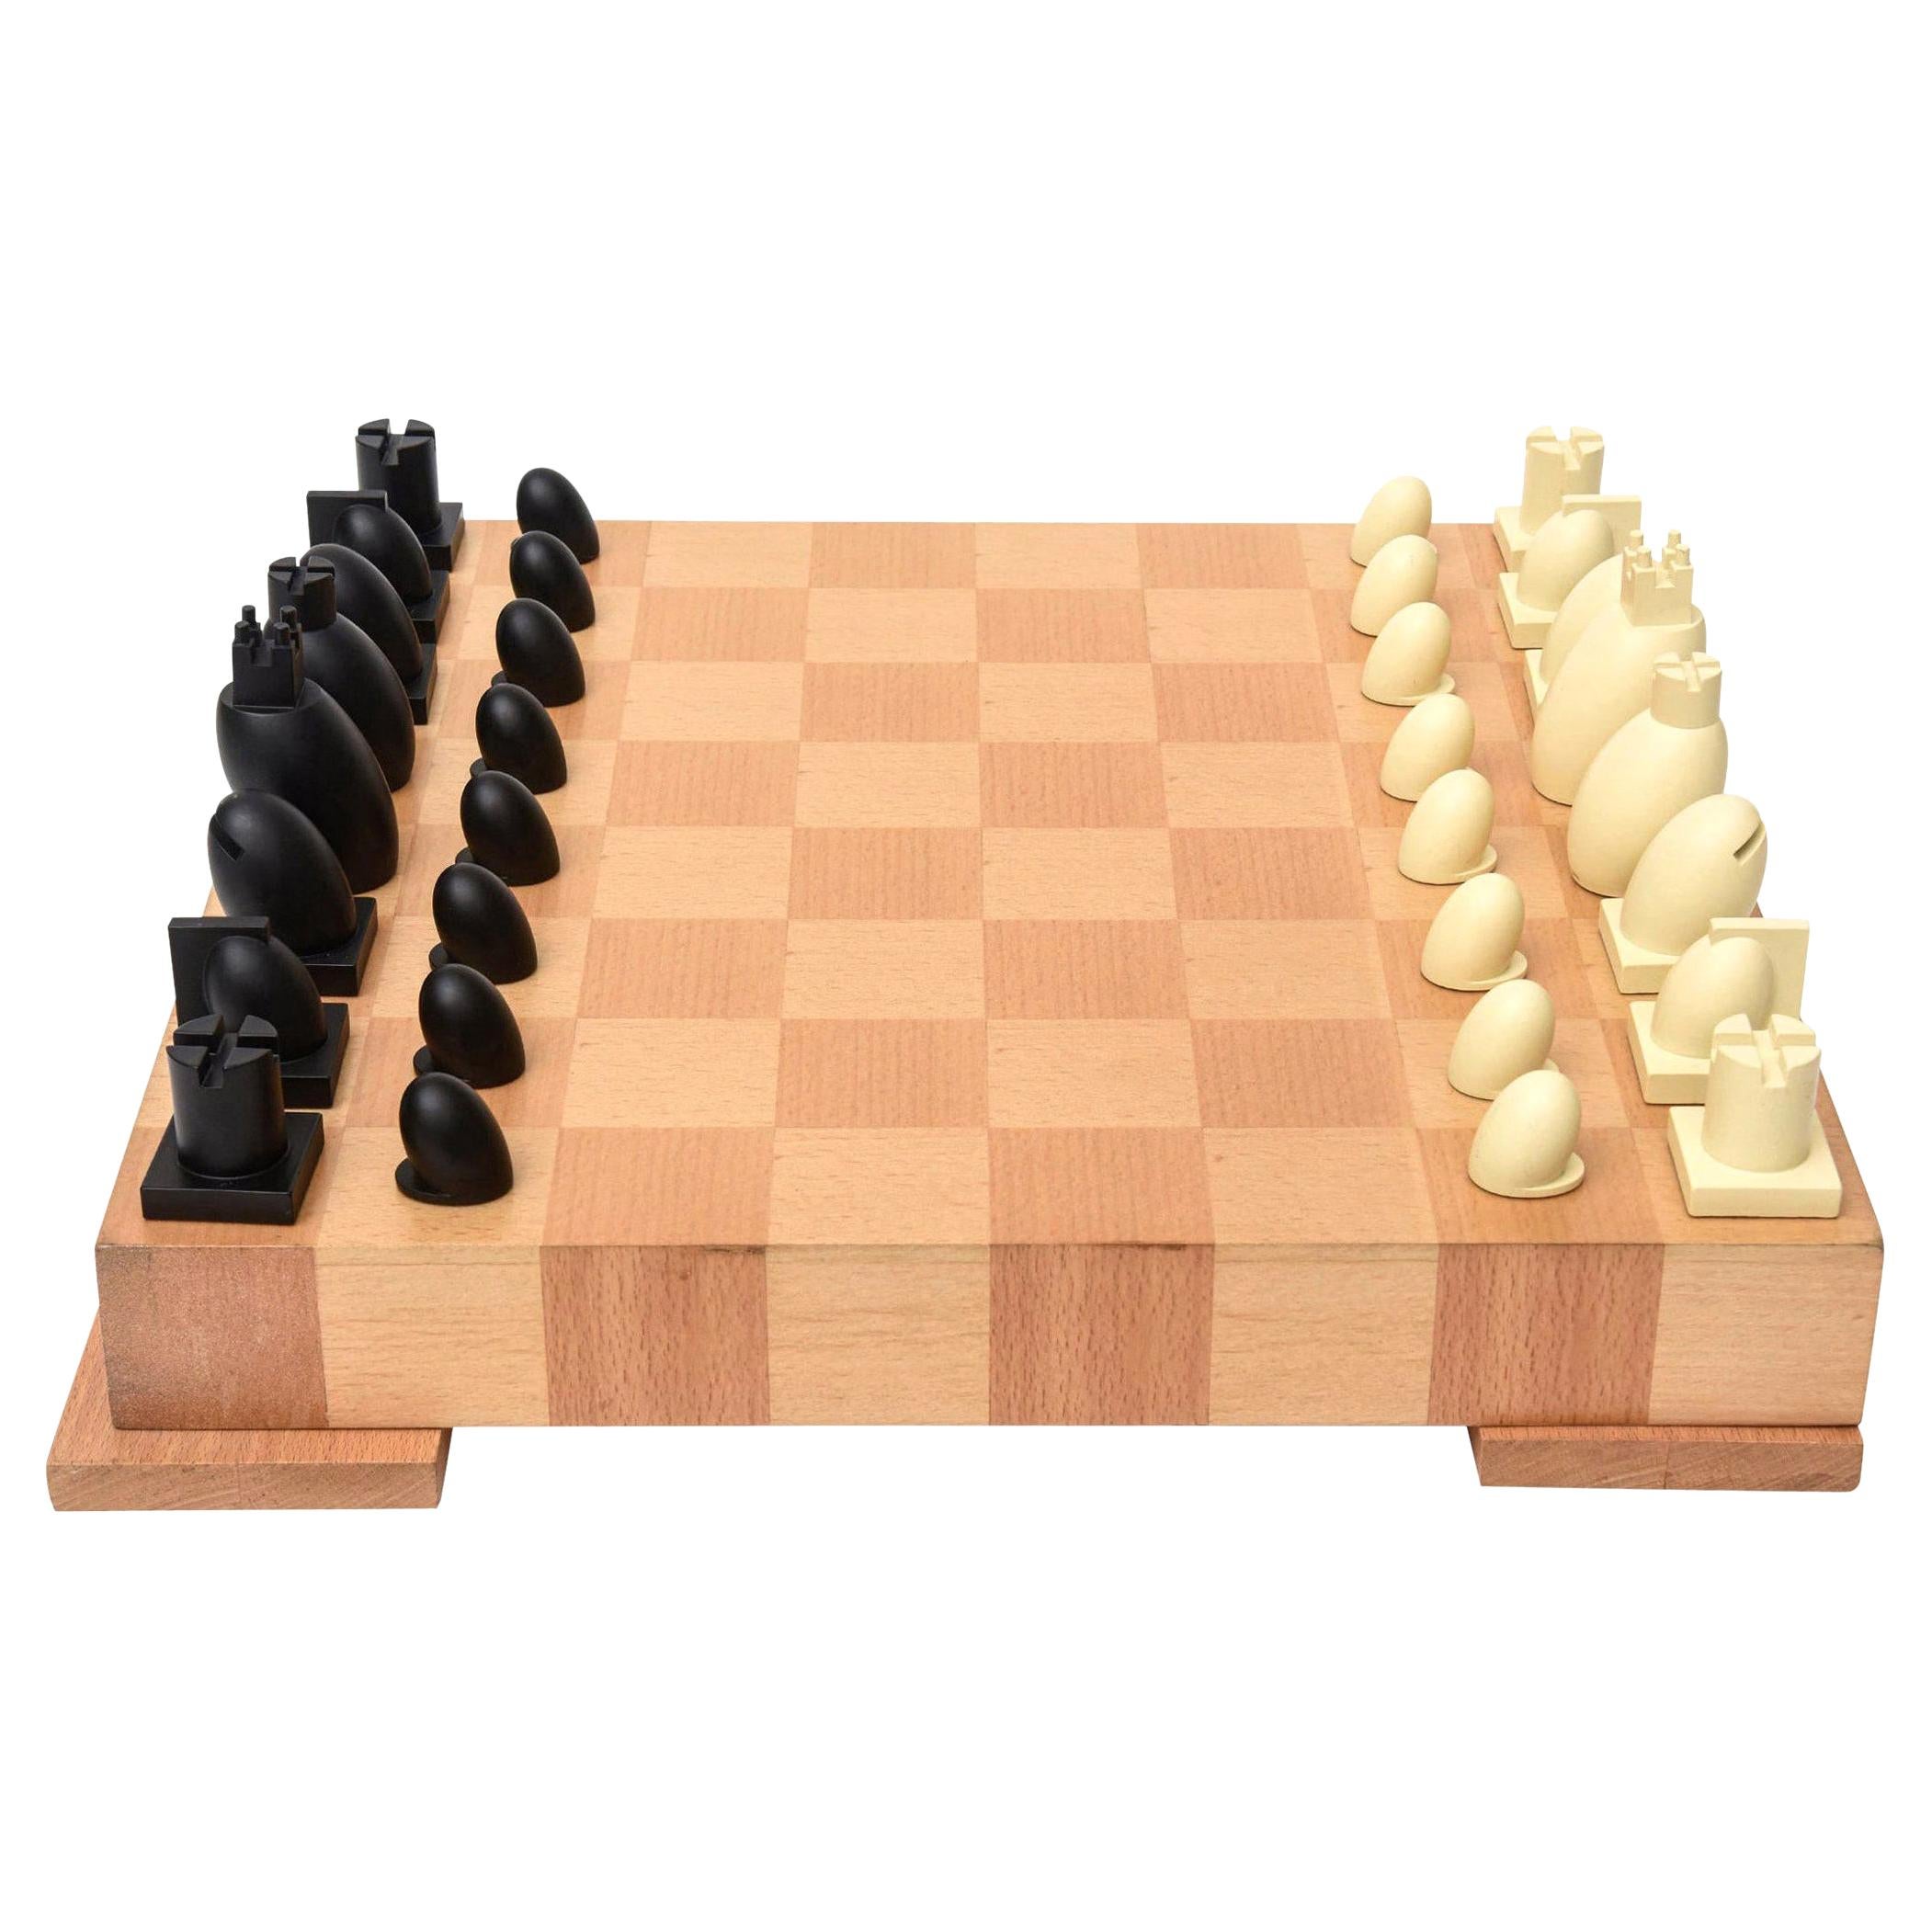 Michael Graves Postmodern Chess and Checkers Set